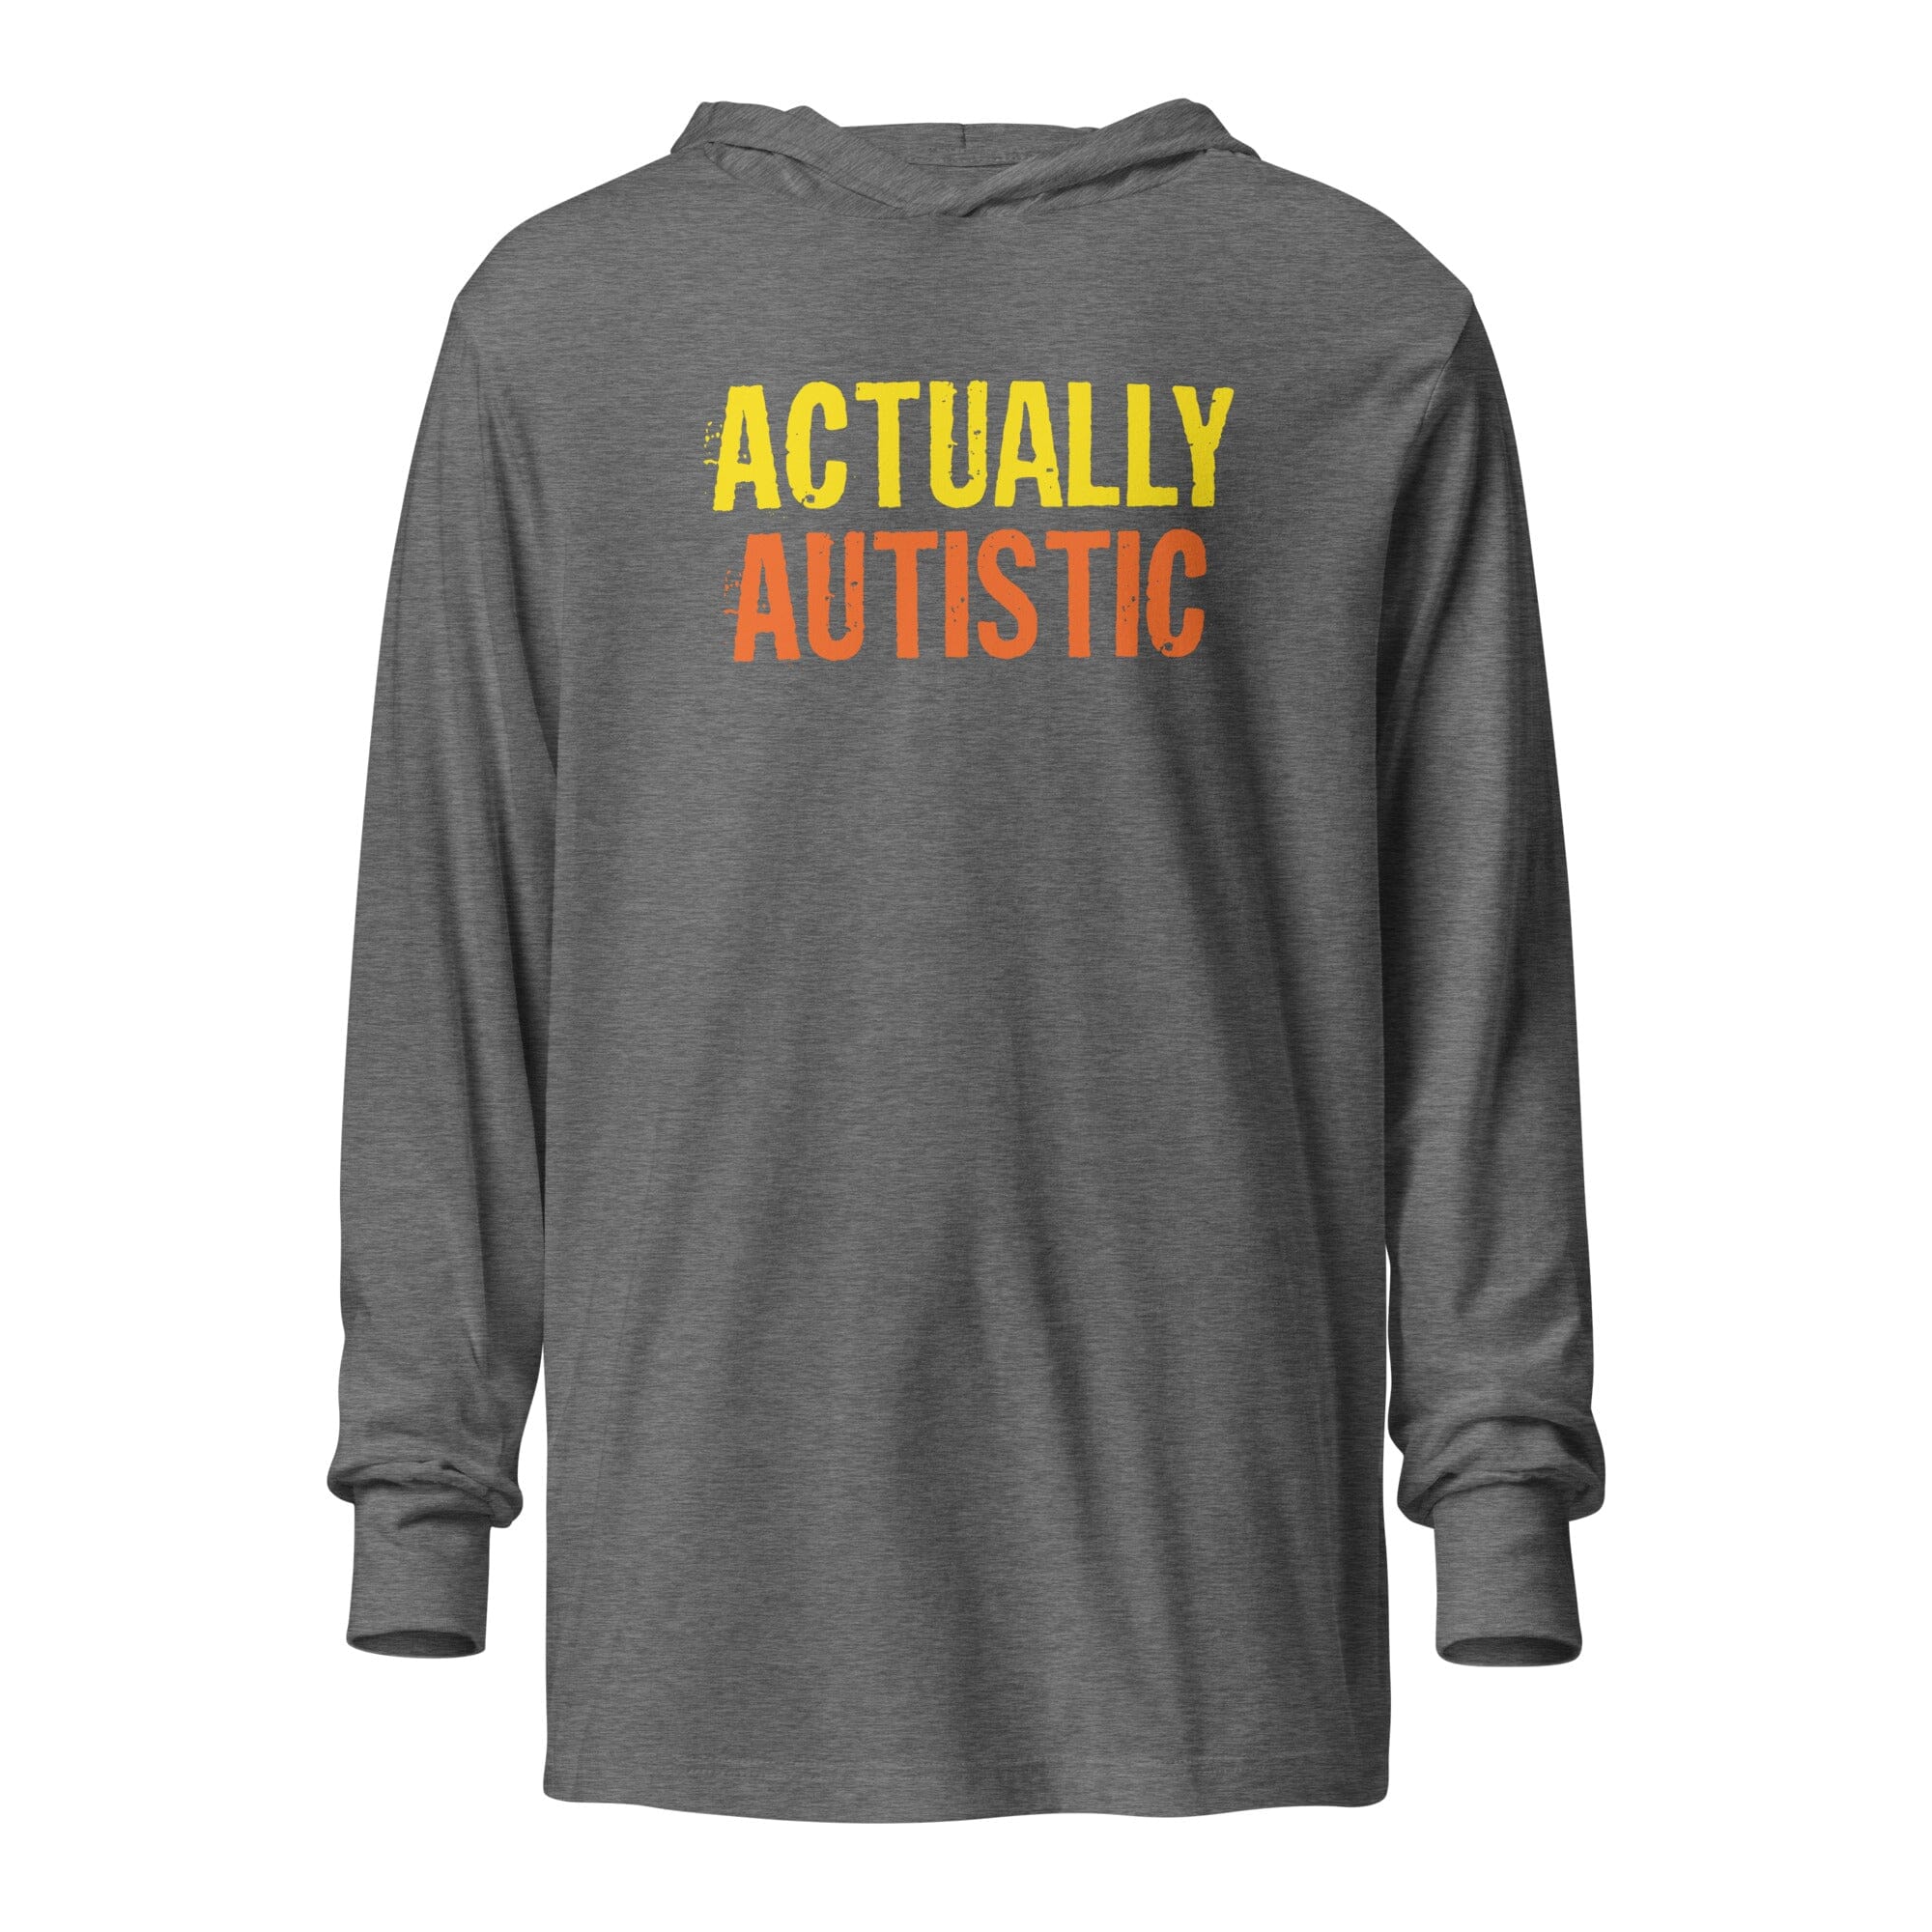 Actually Autistic Unisex Hooded long-sleeve tee The Autistic Innovator Grey Triblend XS 